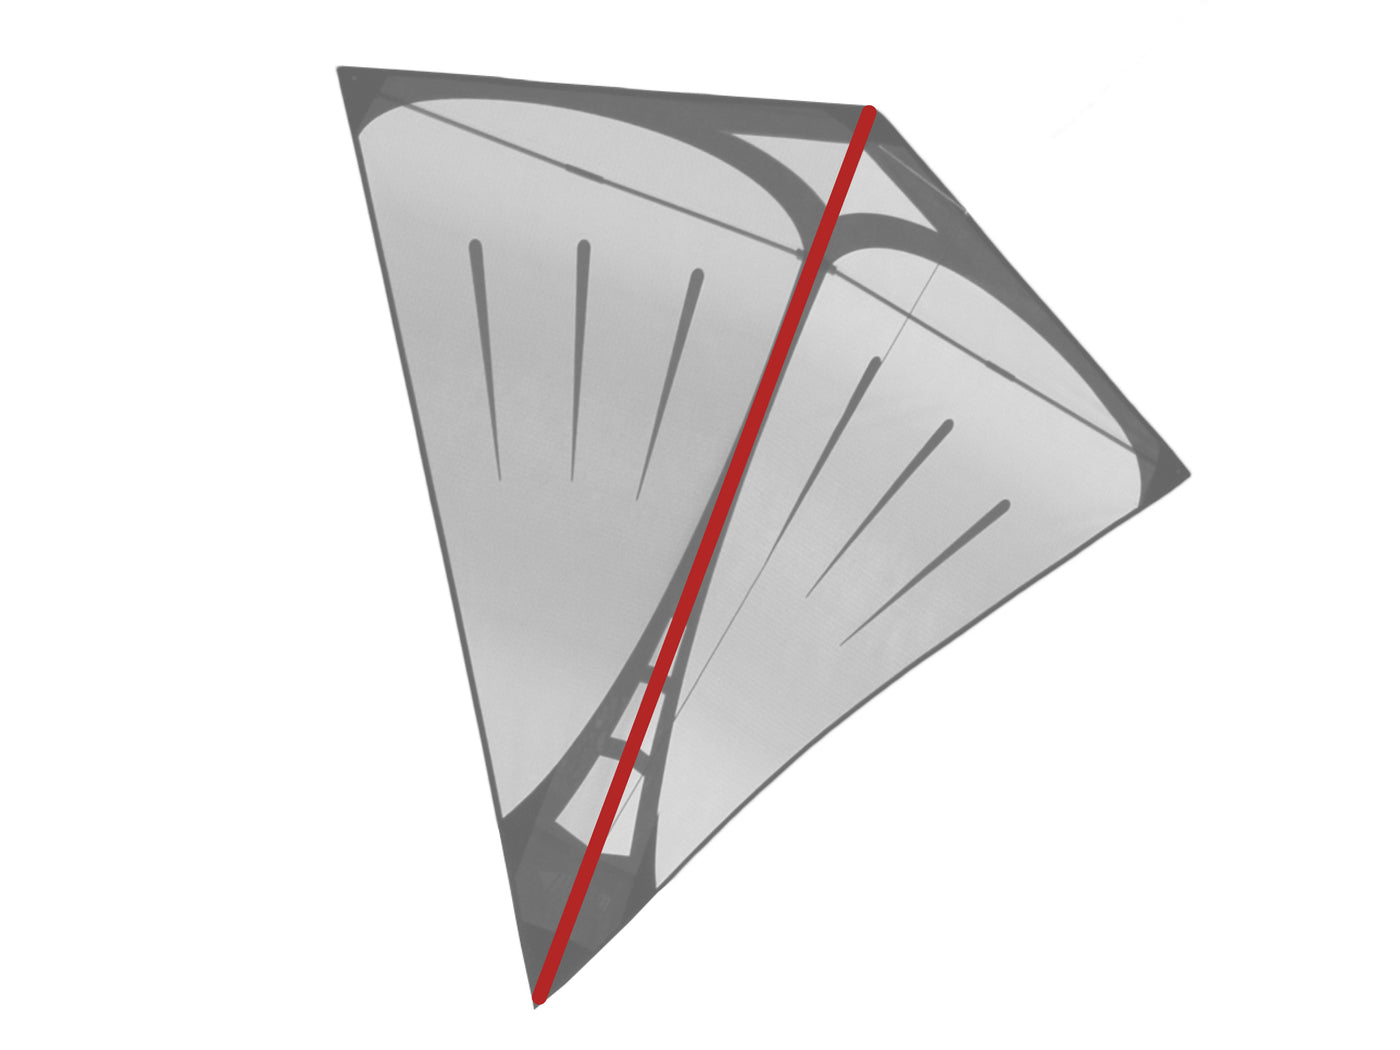 Diagram showing location of the Pica Spine on the kite.